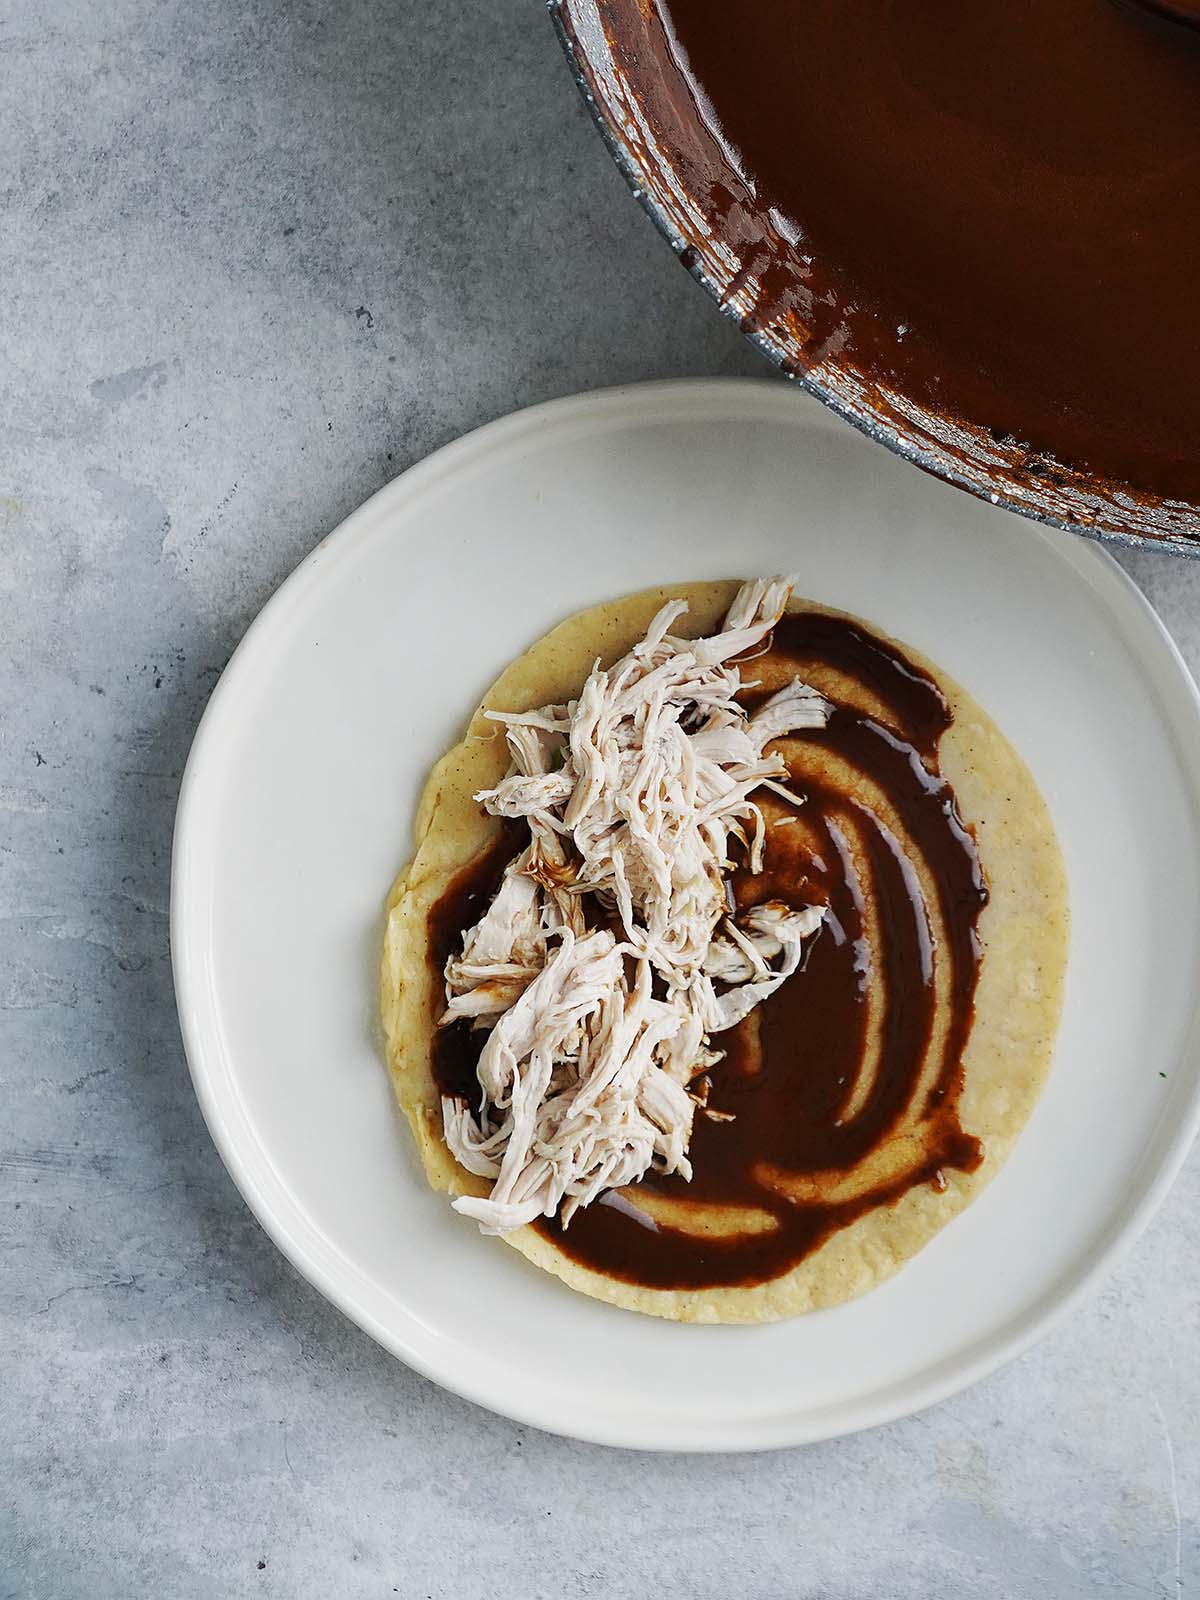 A corn tortilla with mole sauce and shredded chicken on one side of the tortilla.